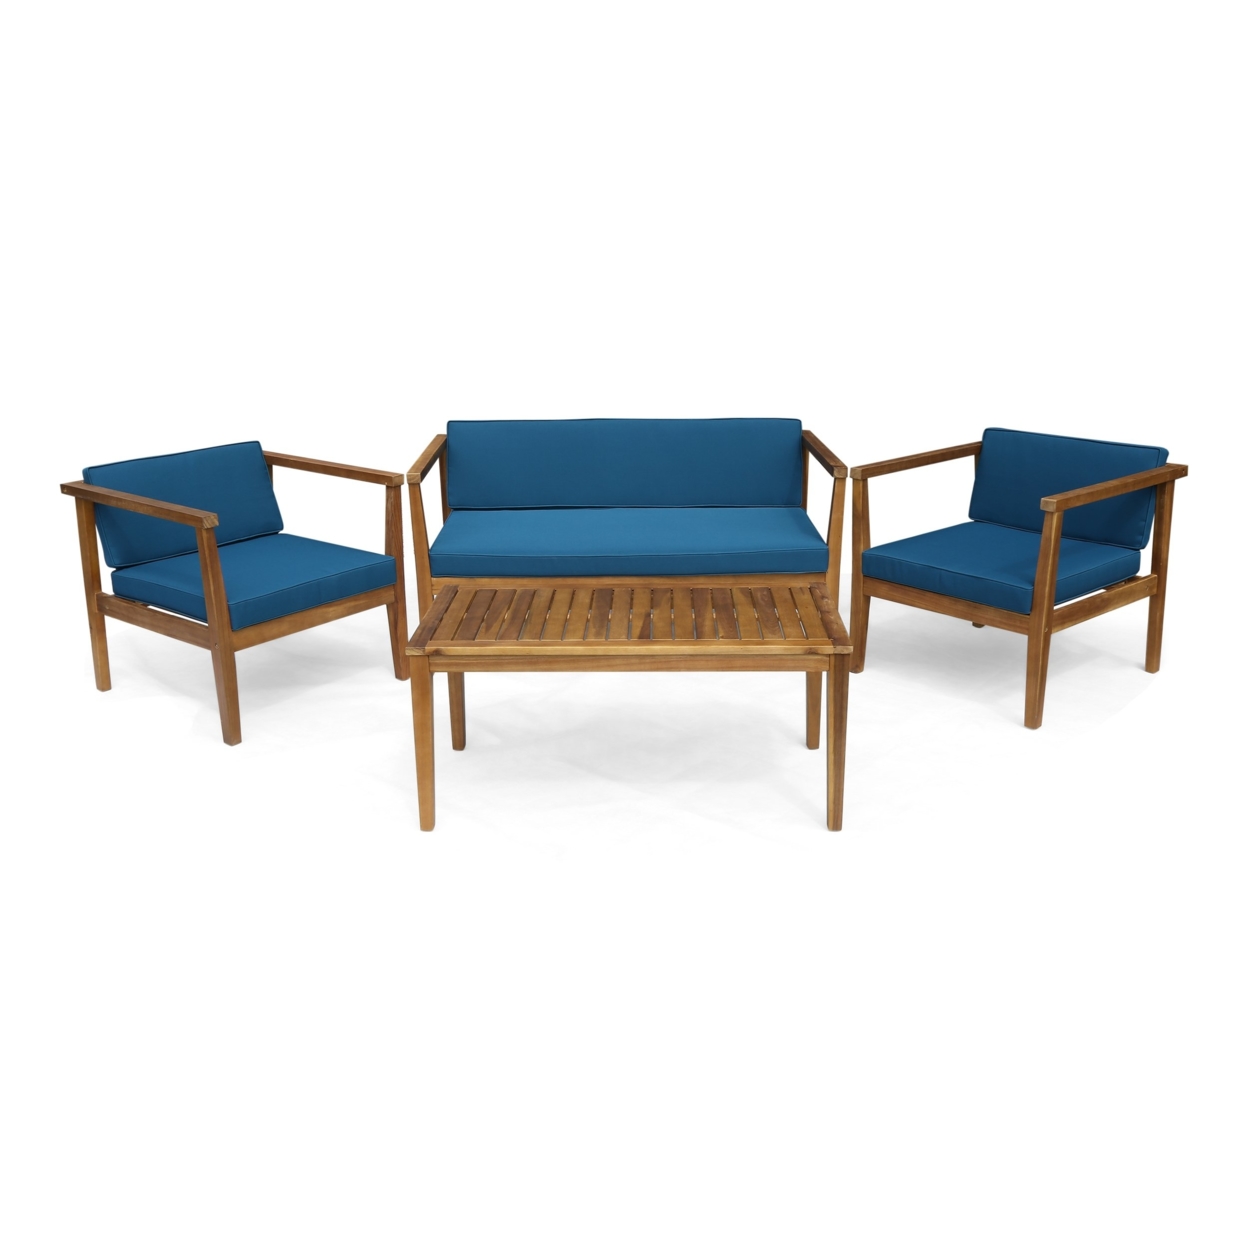 Maddox Outdoor 4-Seater Acacia Wood Chat Set With Coffee Table - Dark Teal, Teak